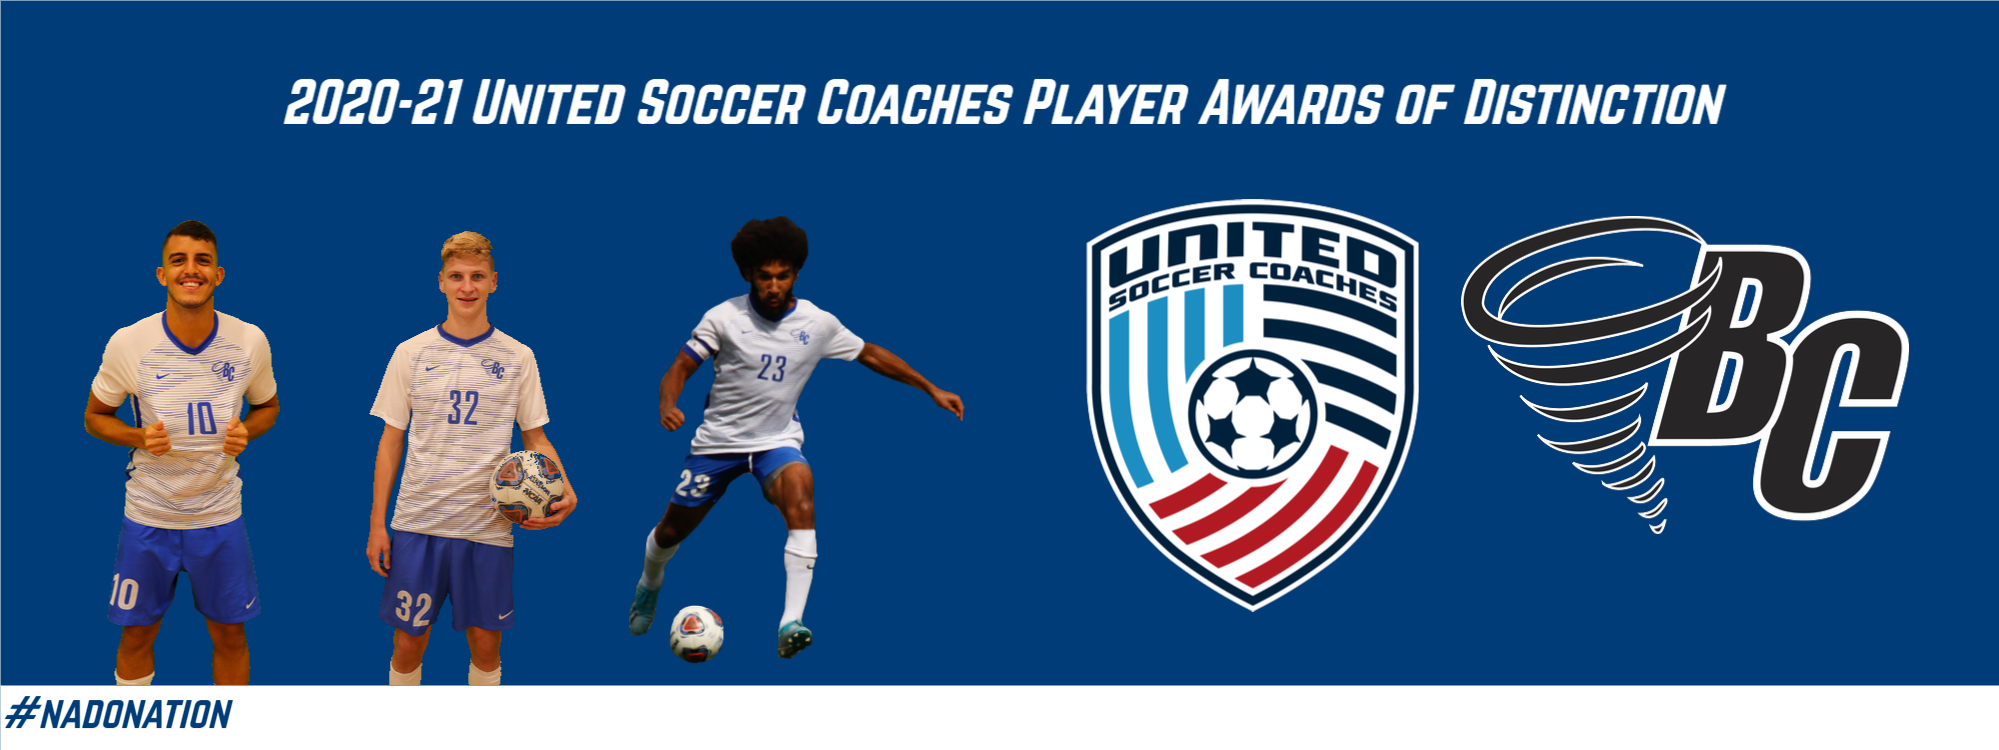 Lima, O’Callaghan and Spencer Earn Awards of Distinction from United Soccer Coaches